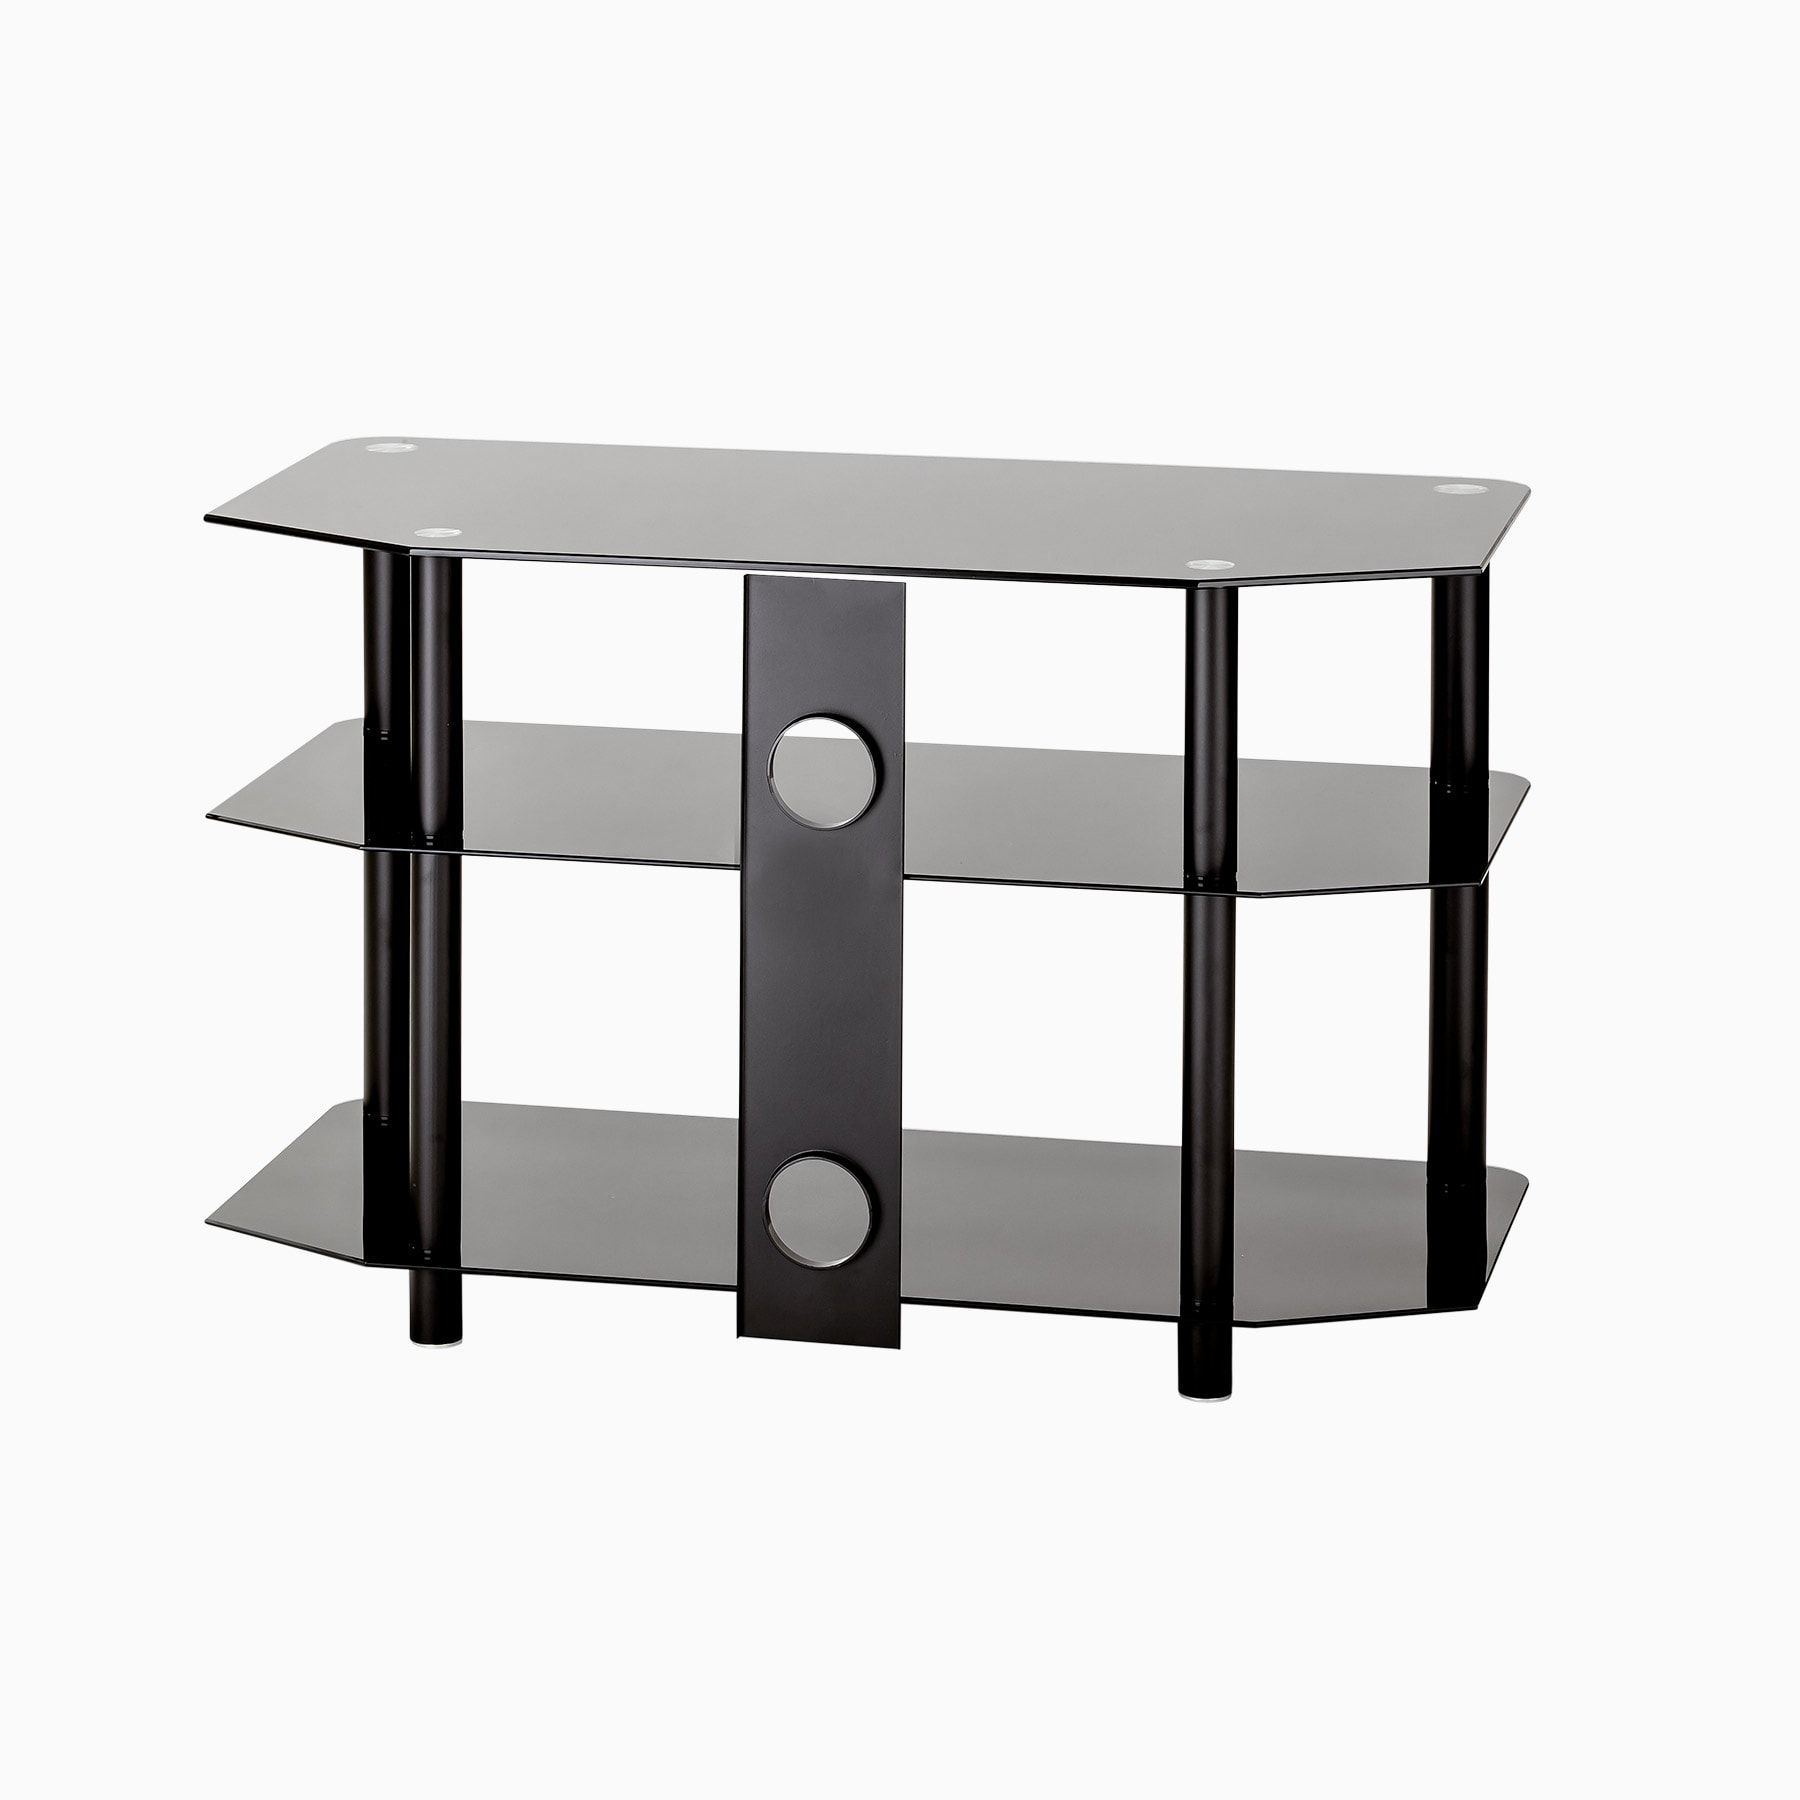 Black Glass Corner Tv Stand Up To 49 Inch Tv | Mmt Zgbb1000 Regarding Glass Tv Stands (View 10 of 15)